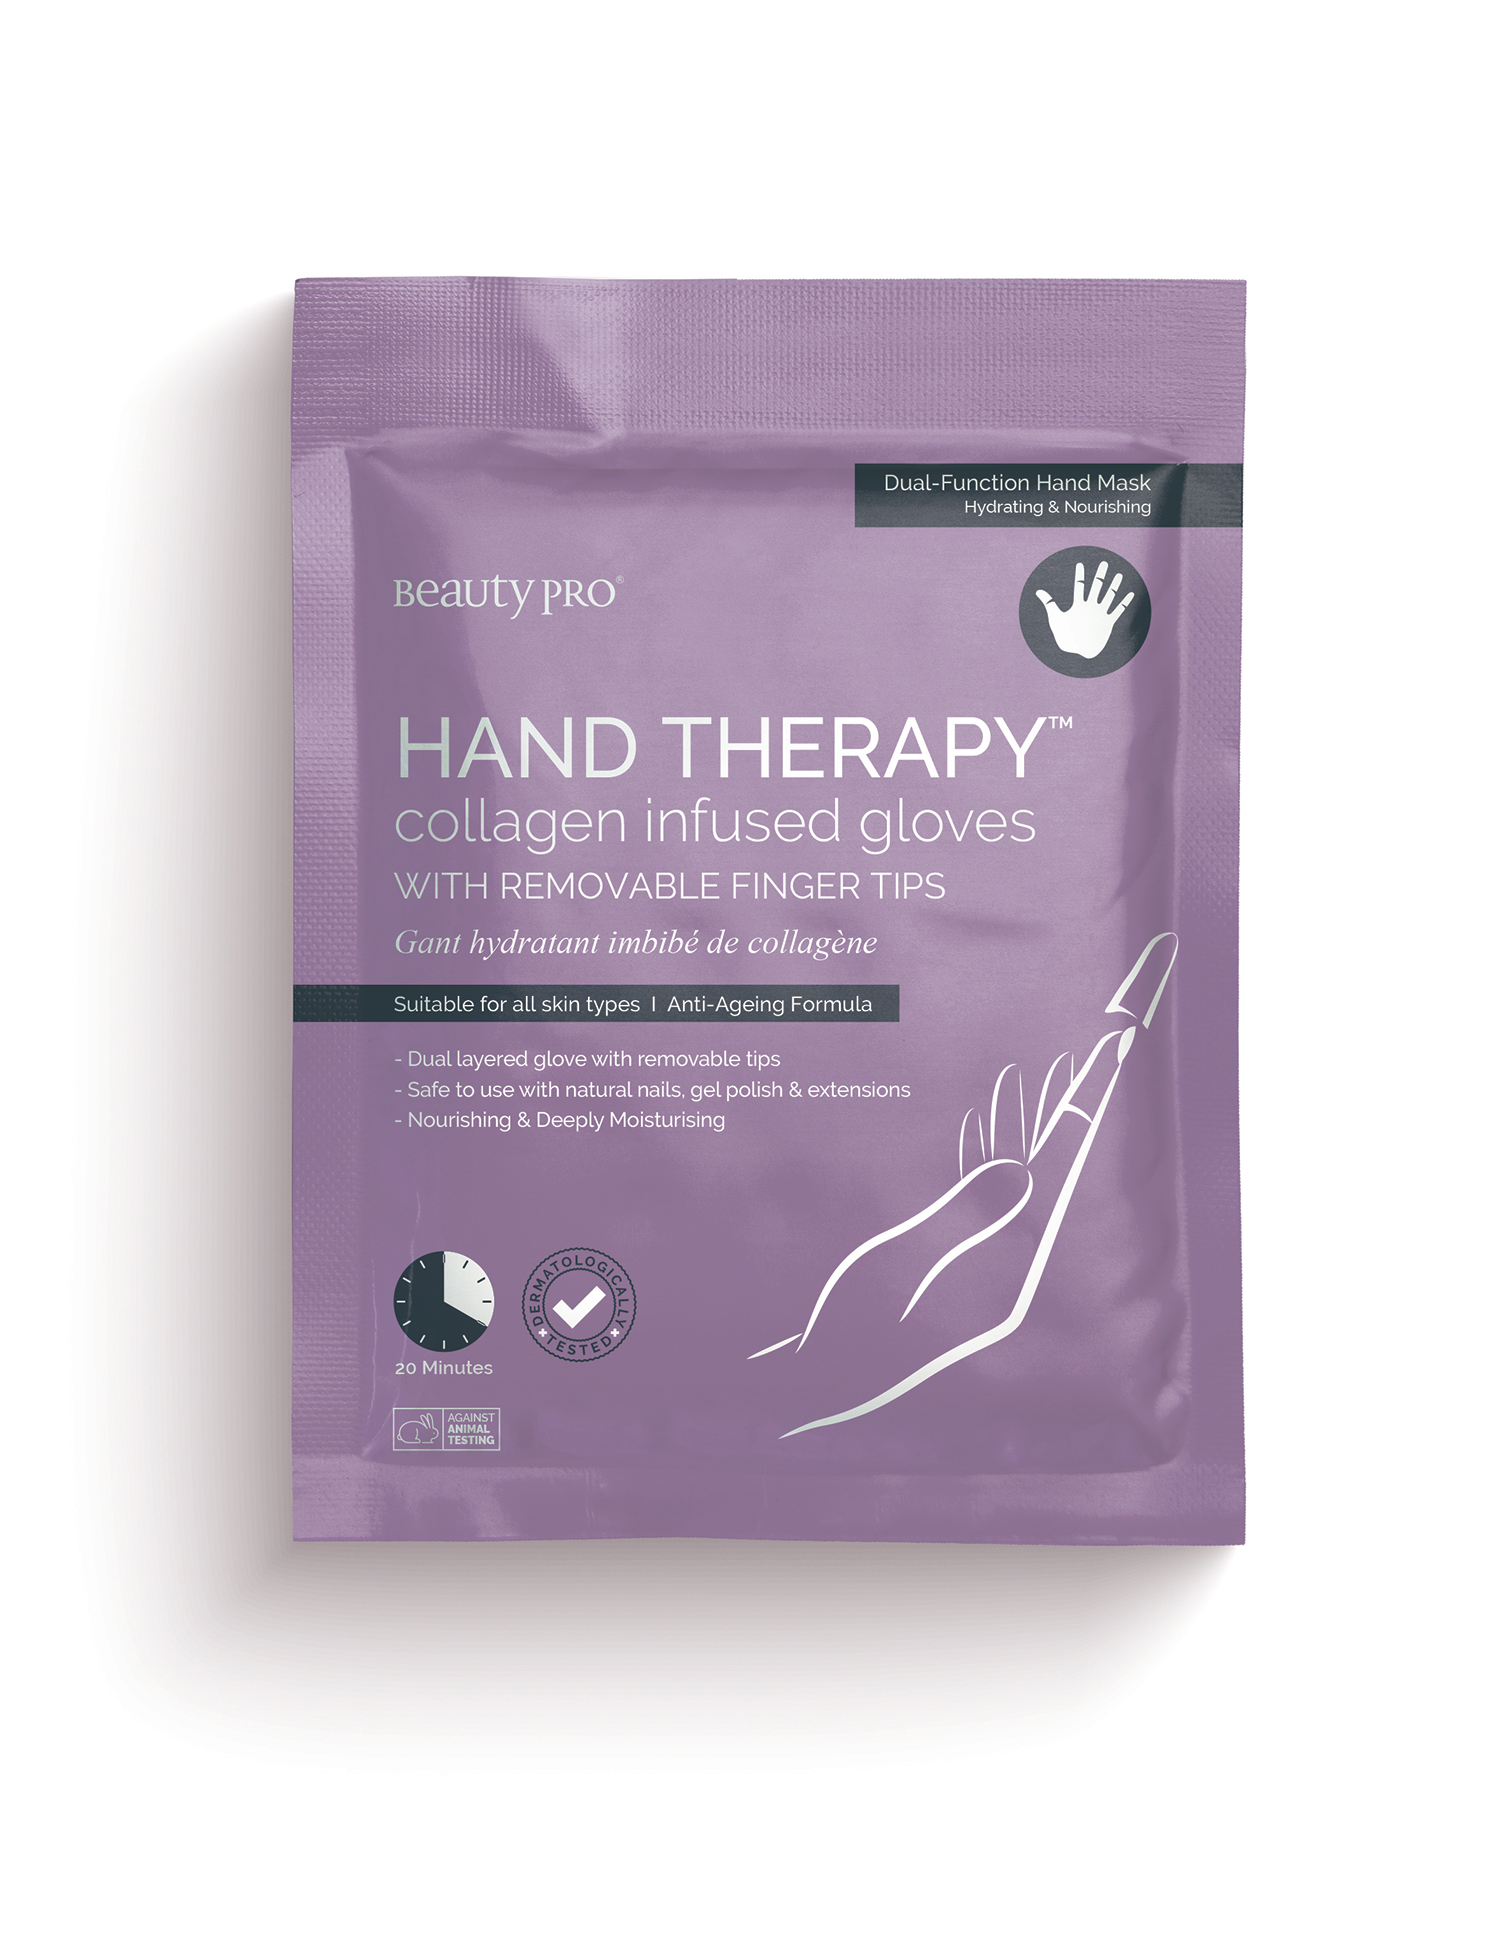 HAND THERAPY Collagen Infused Glove with Removable Fingertip 17g 